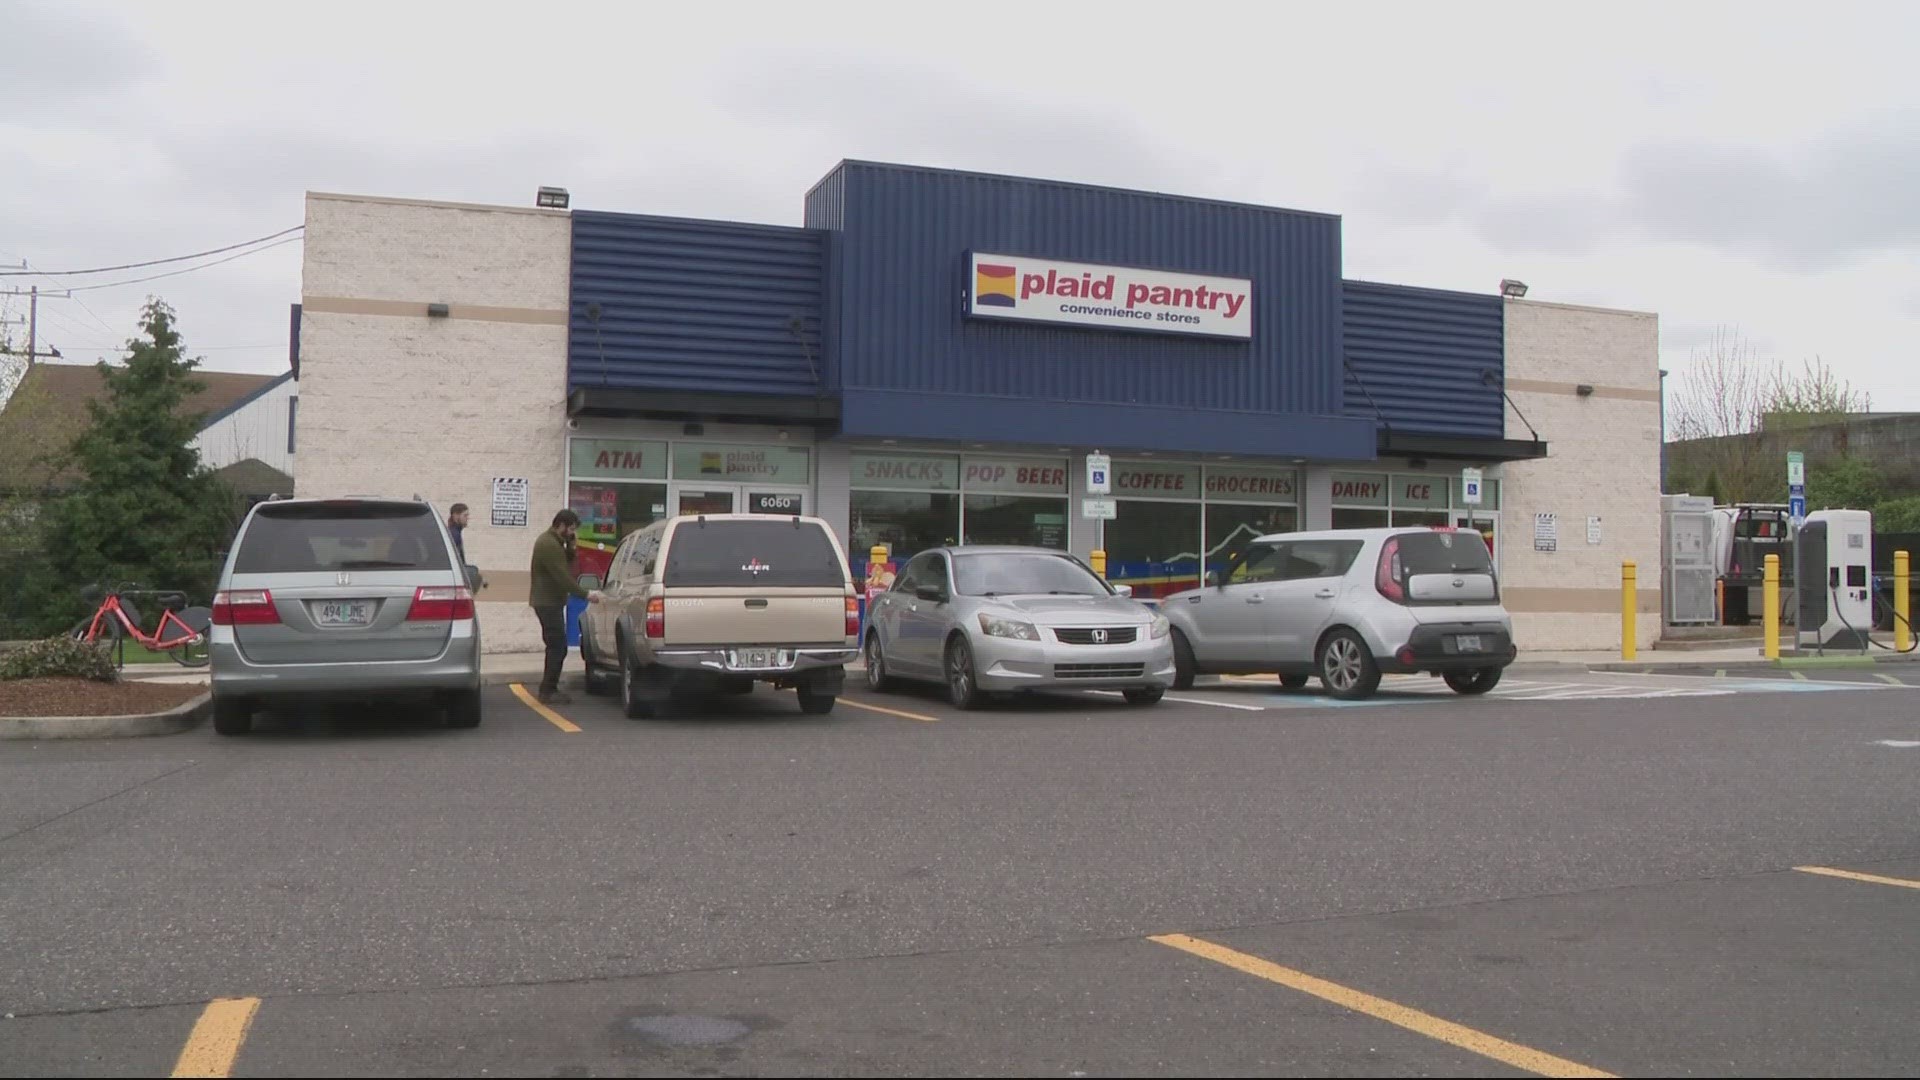 The winning Powerball ticket was purchased at a Northeast Portland Plaid Pantry on Saturday.